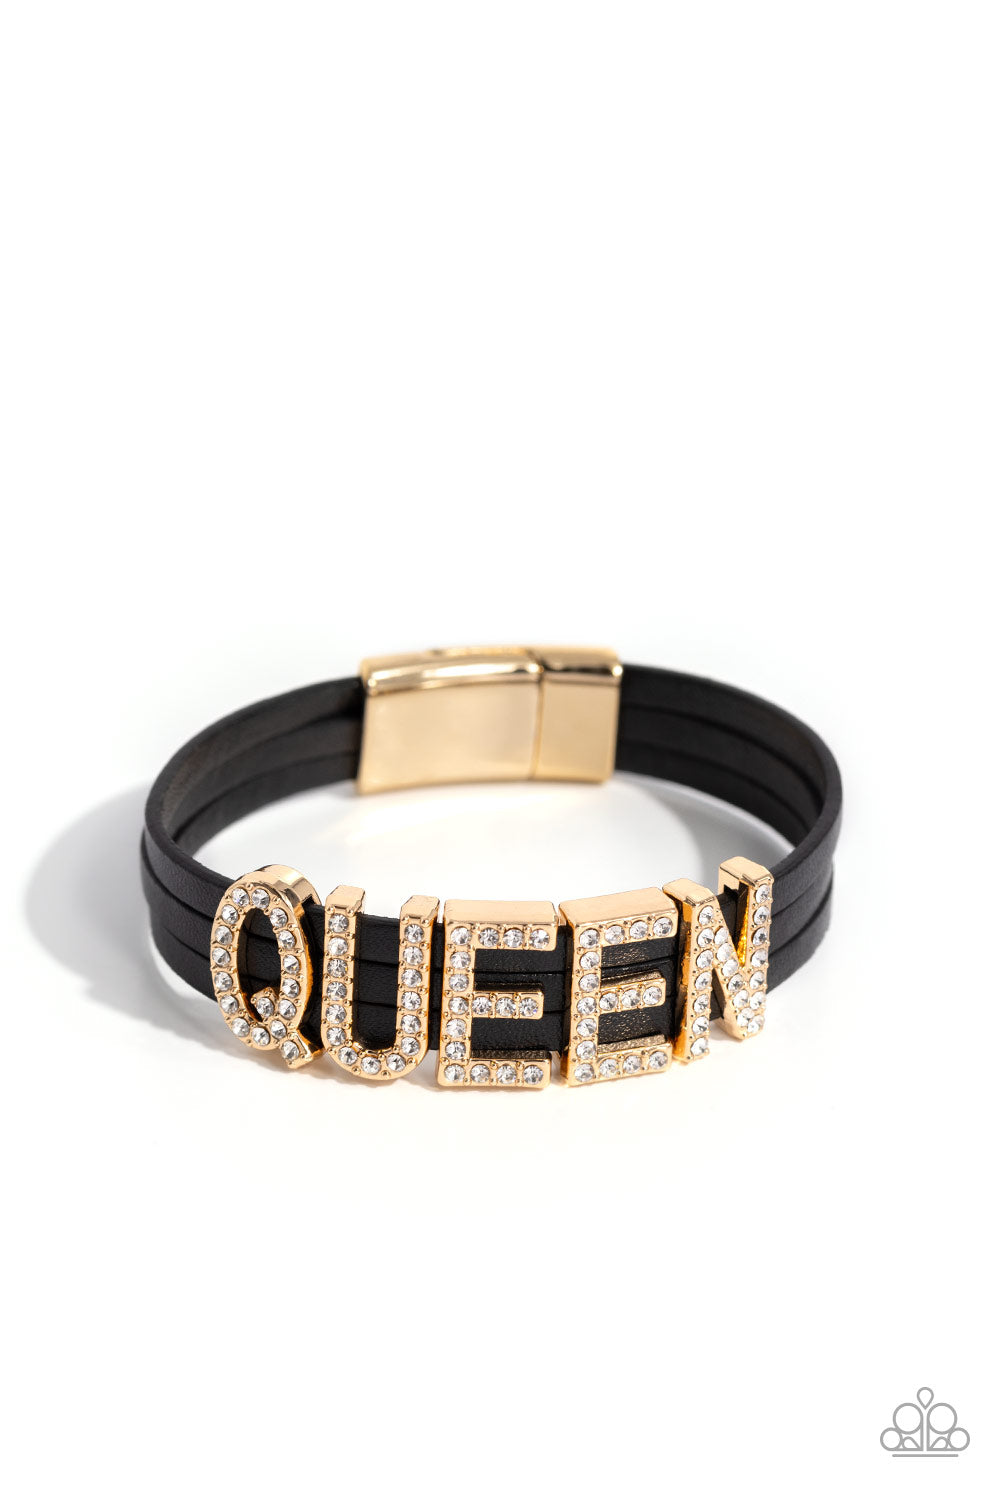 Featuring glistening white rhinestones, gold letter frames forming the word "QUEEN" are threaded along layers of black leather strands around the wrist for a dazzling statement. Features a magnetic closure.  Sold as one individual bracelet.